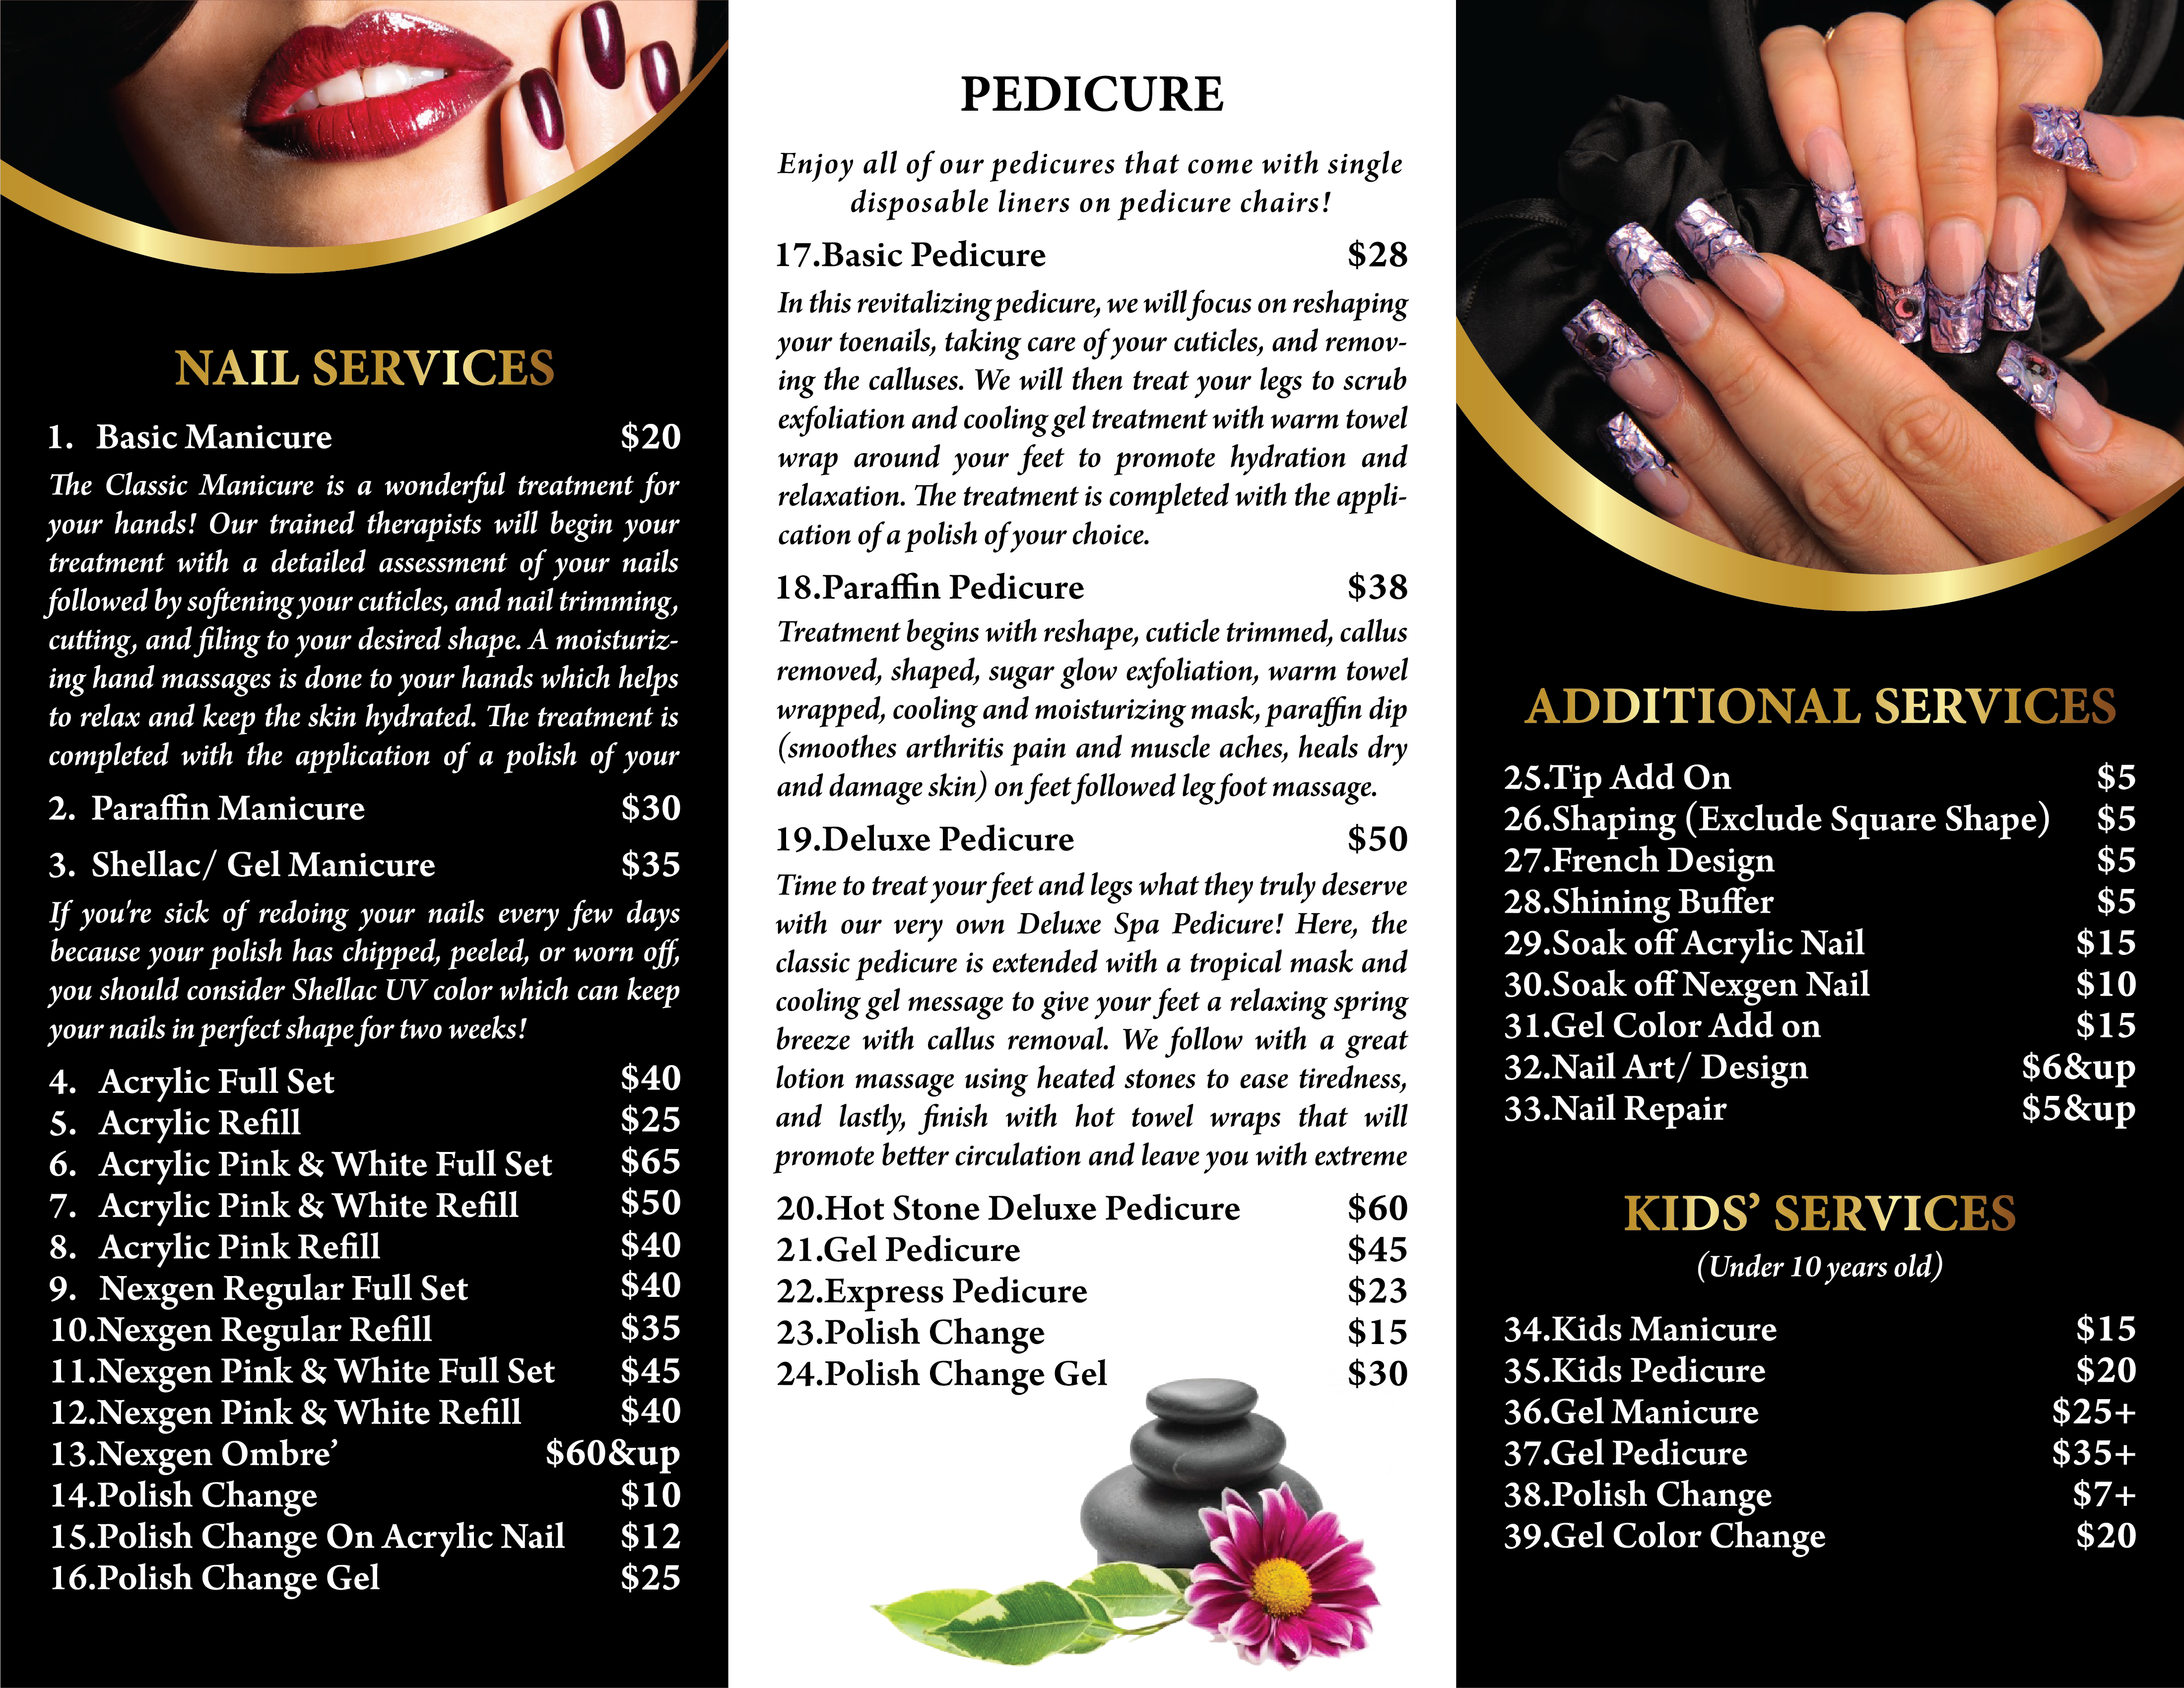 The power of creativity in Brochure design for nail salons in Florida